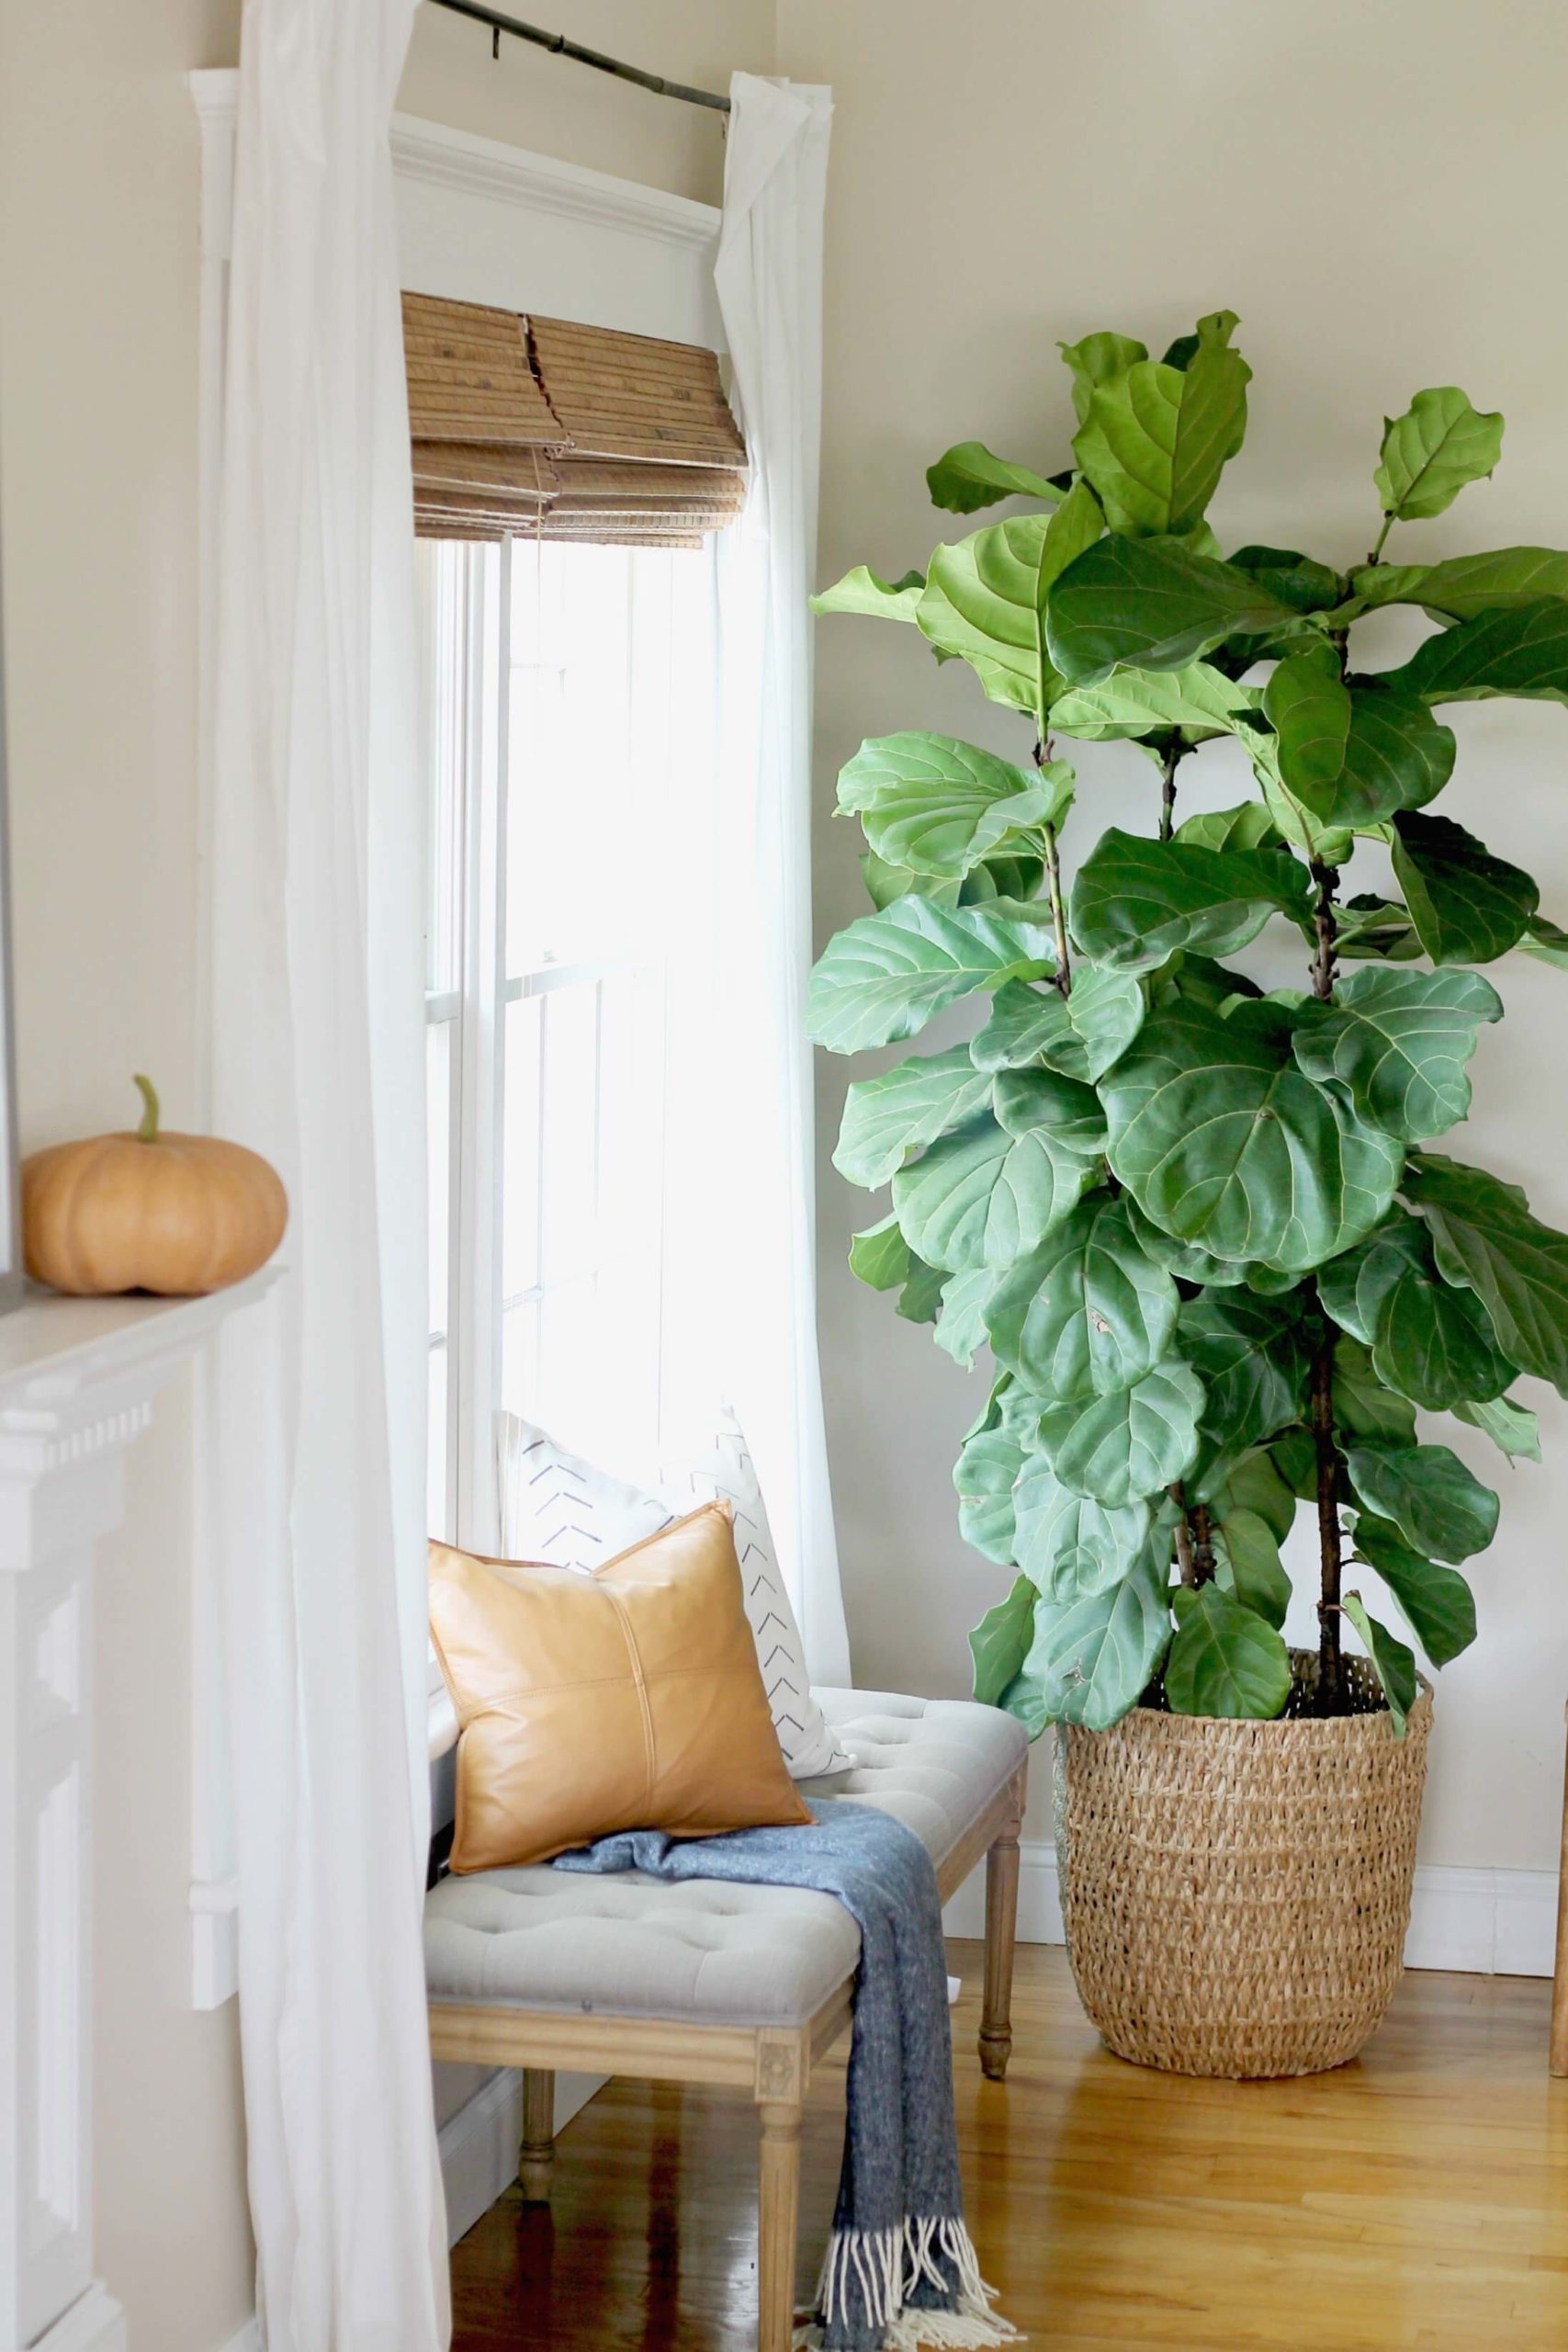 More decor inspirations with plants 3